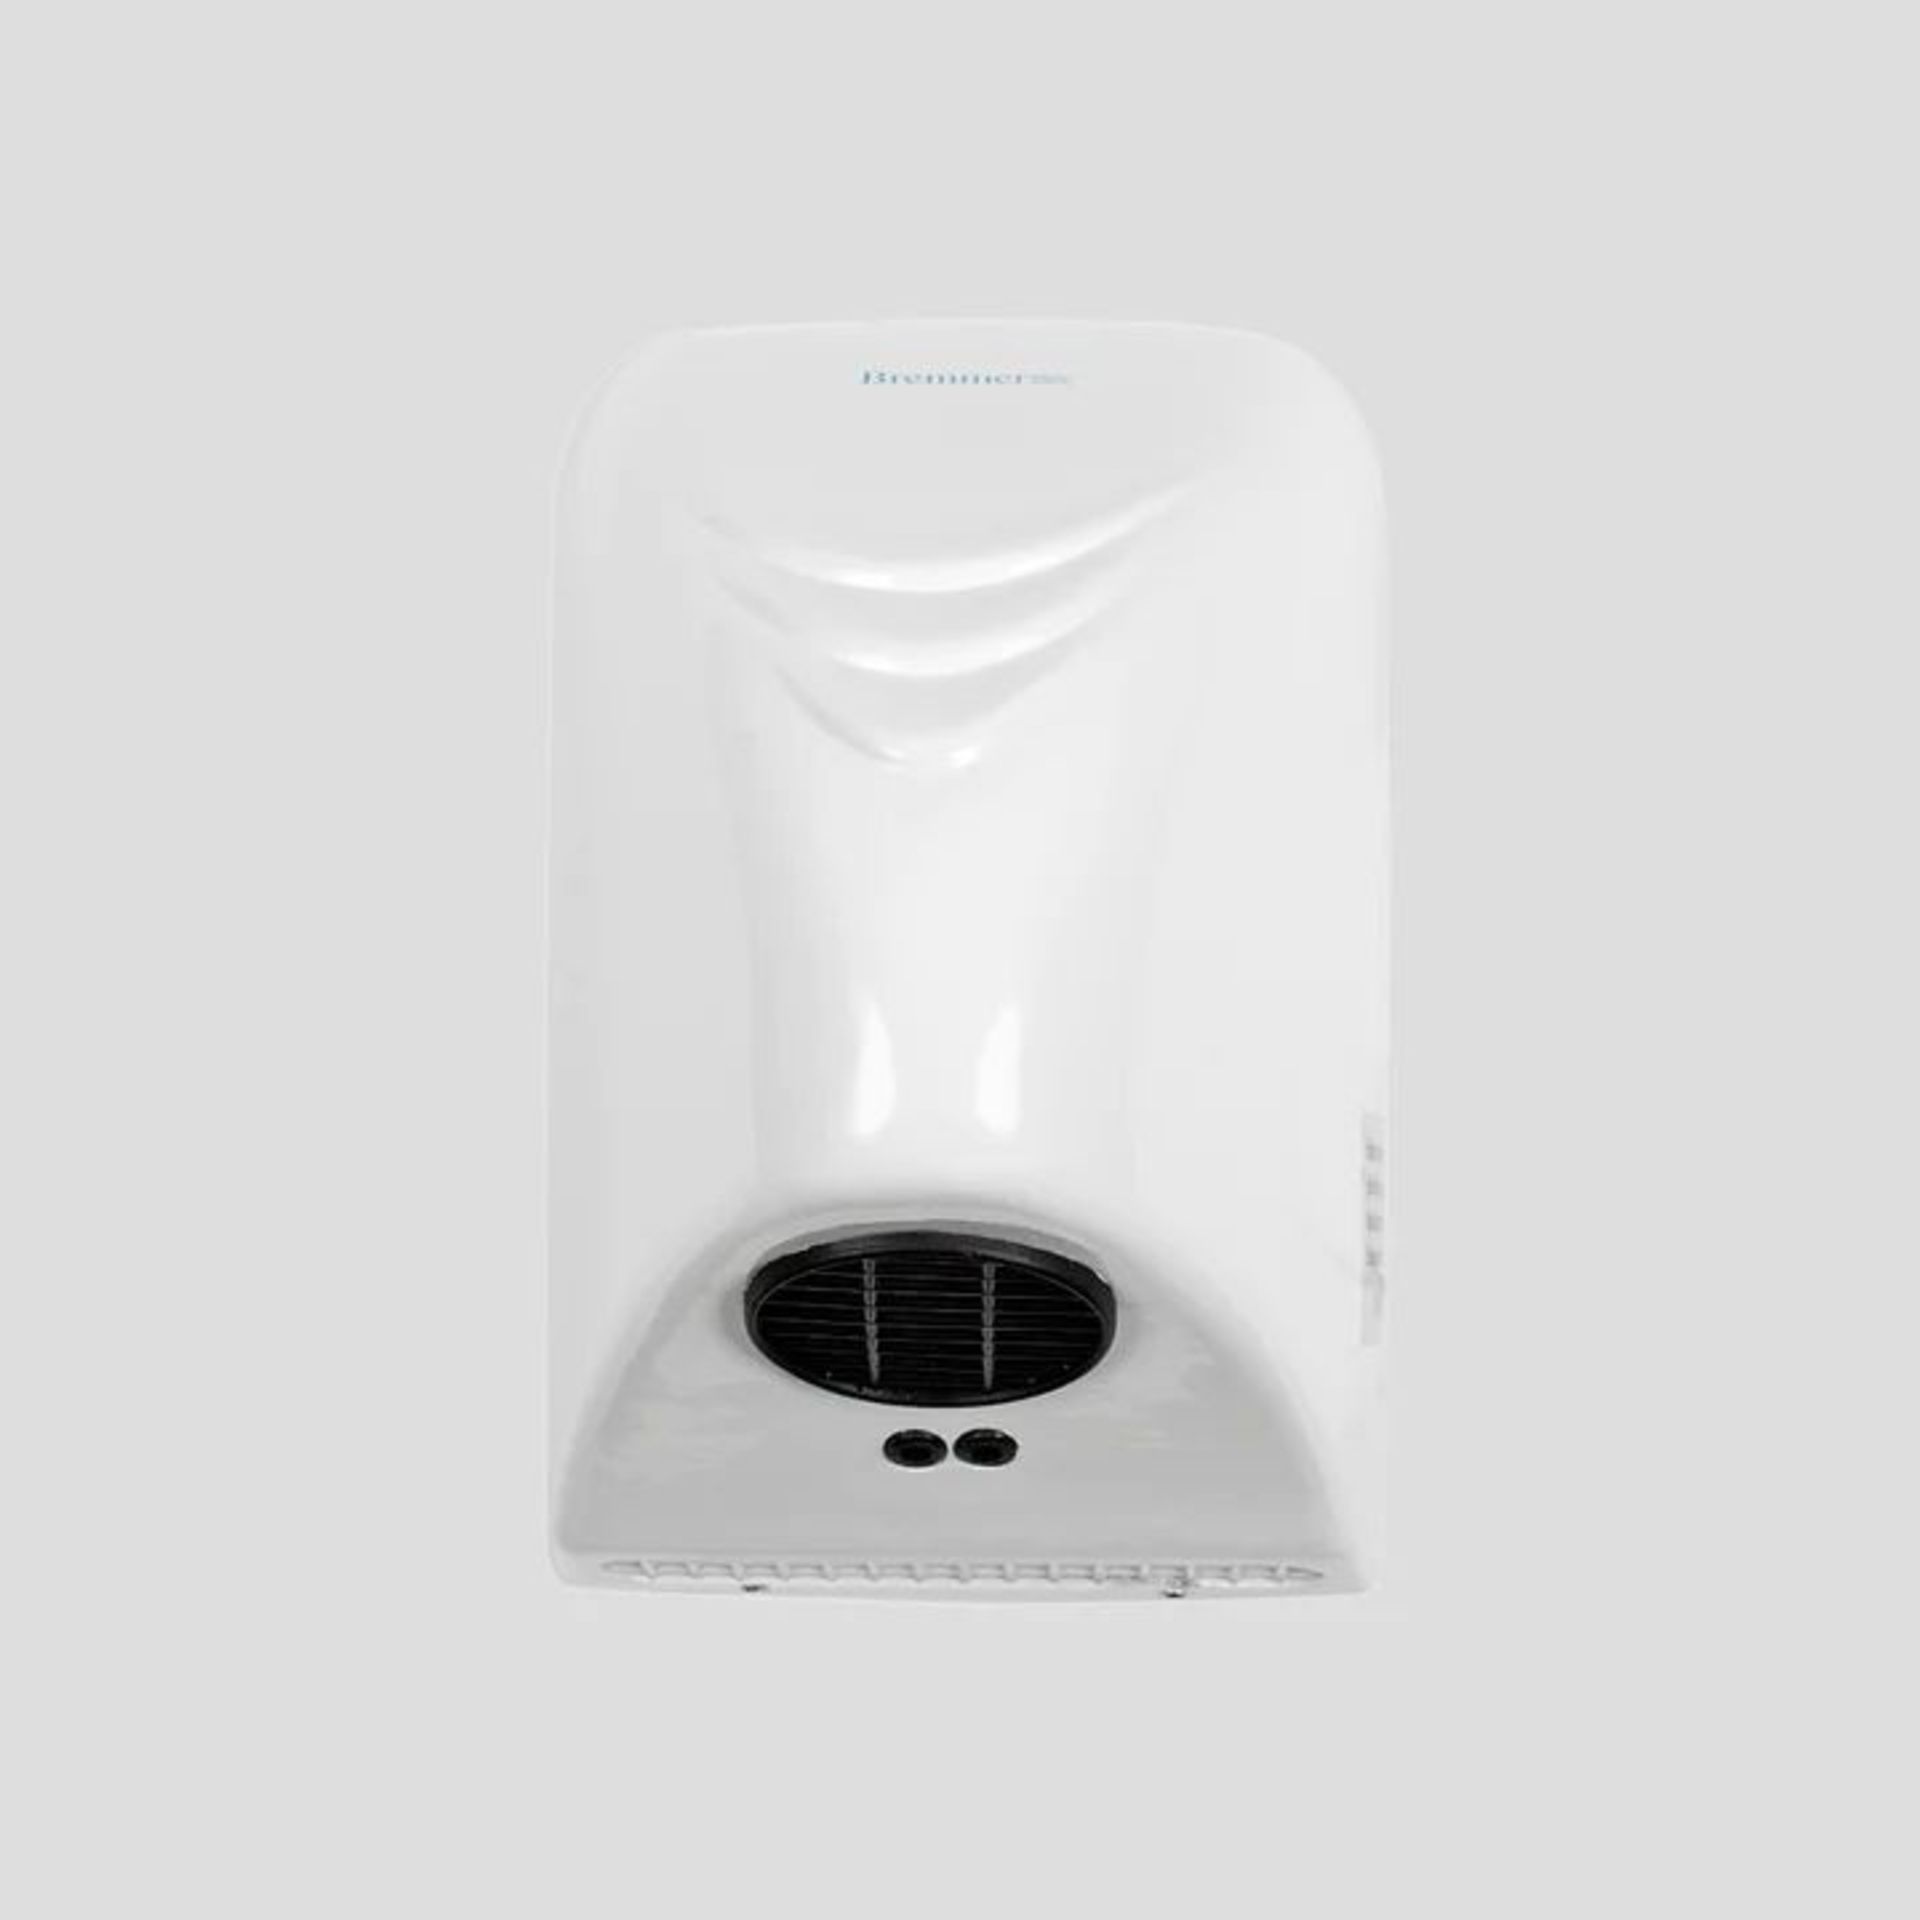 8 X NEW BOXED BREMMER HAND DRYERS. (ROW12.6). PRODUCT SPECS: - Faster Than Your Standard Electric